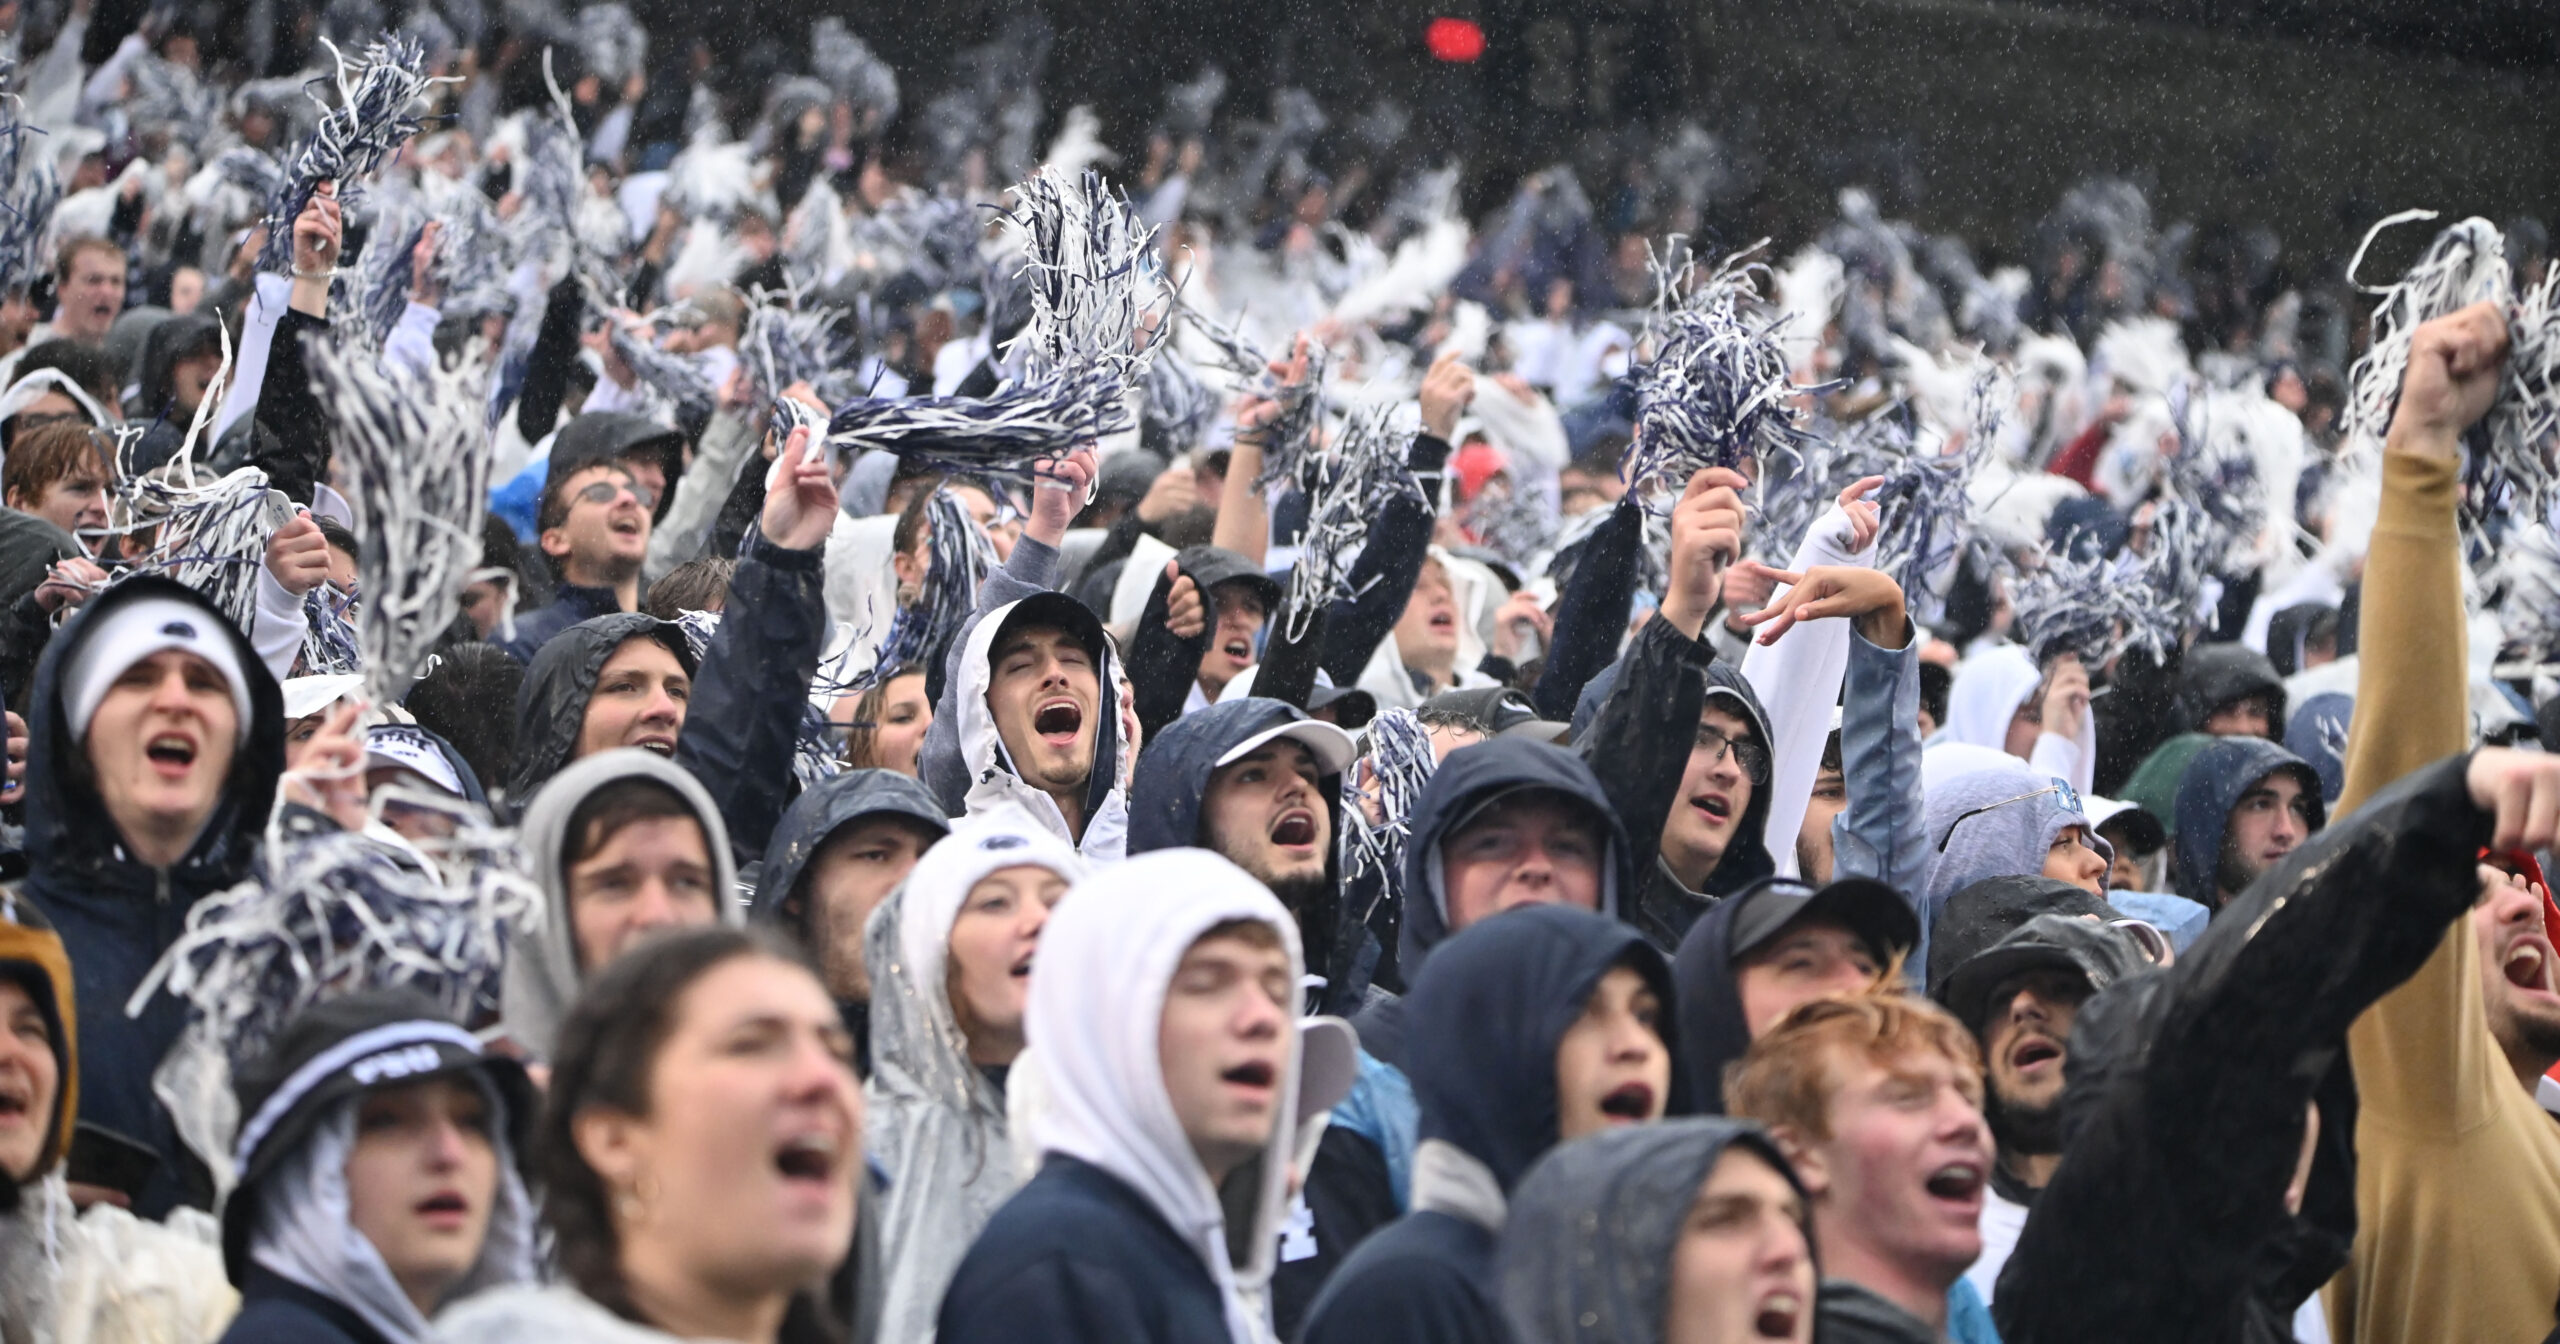 Penn State student section